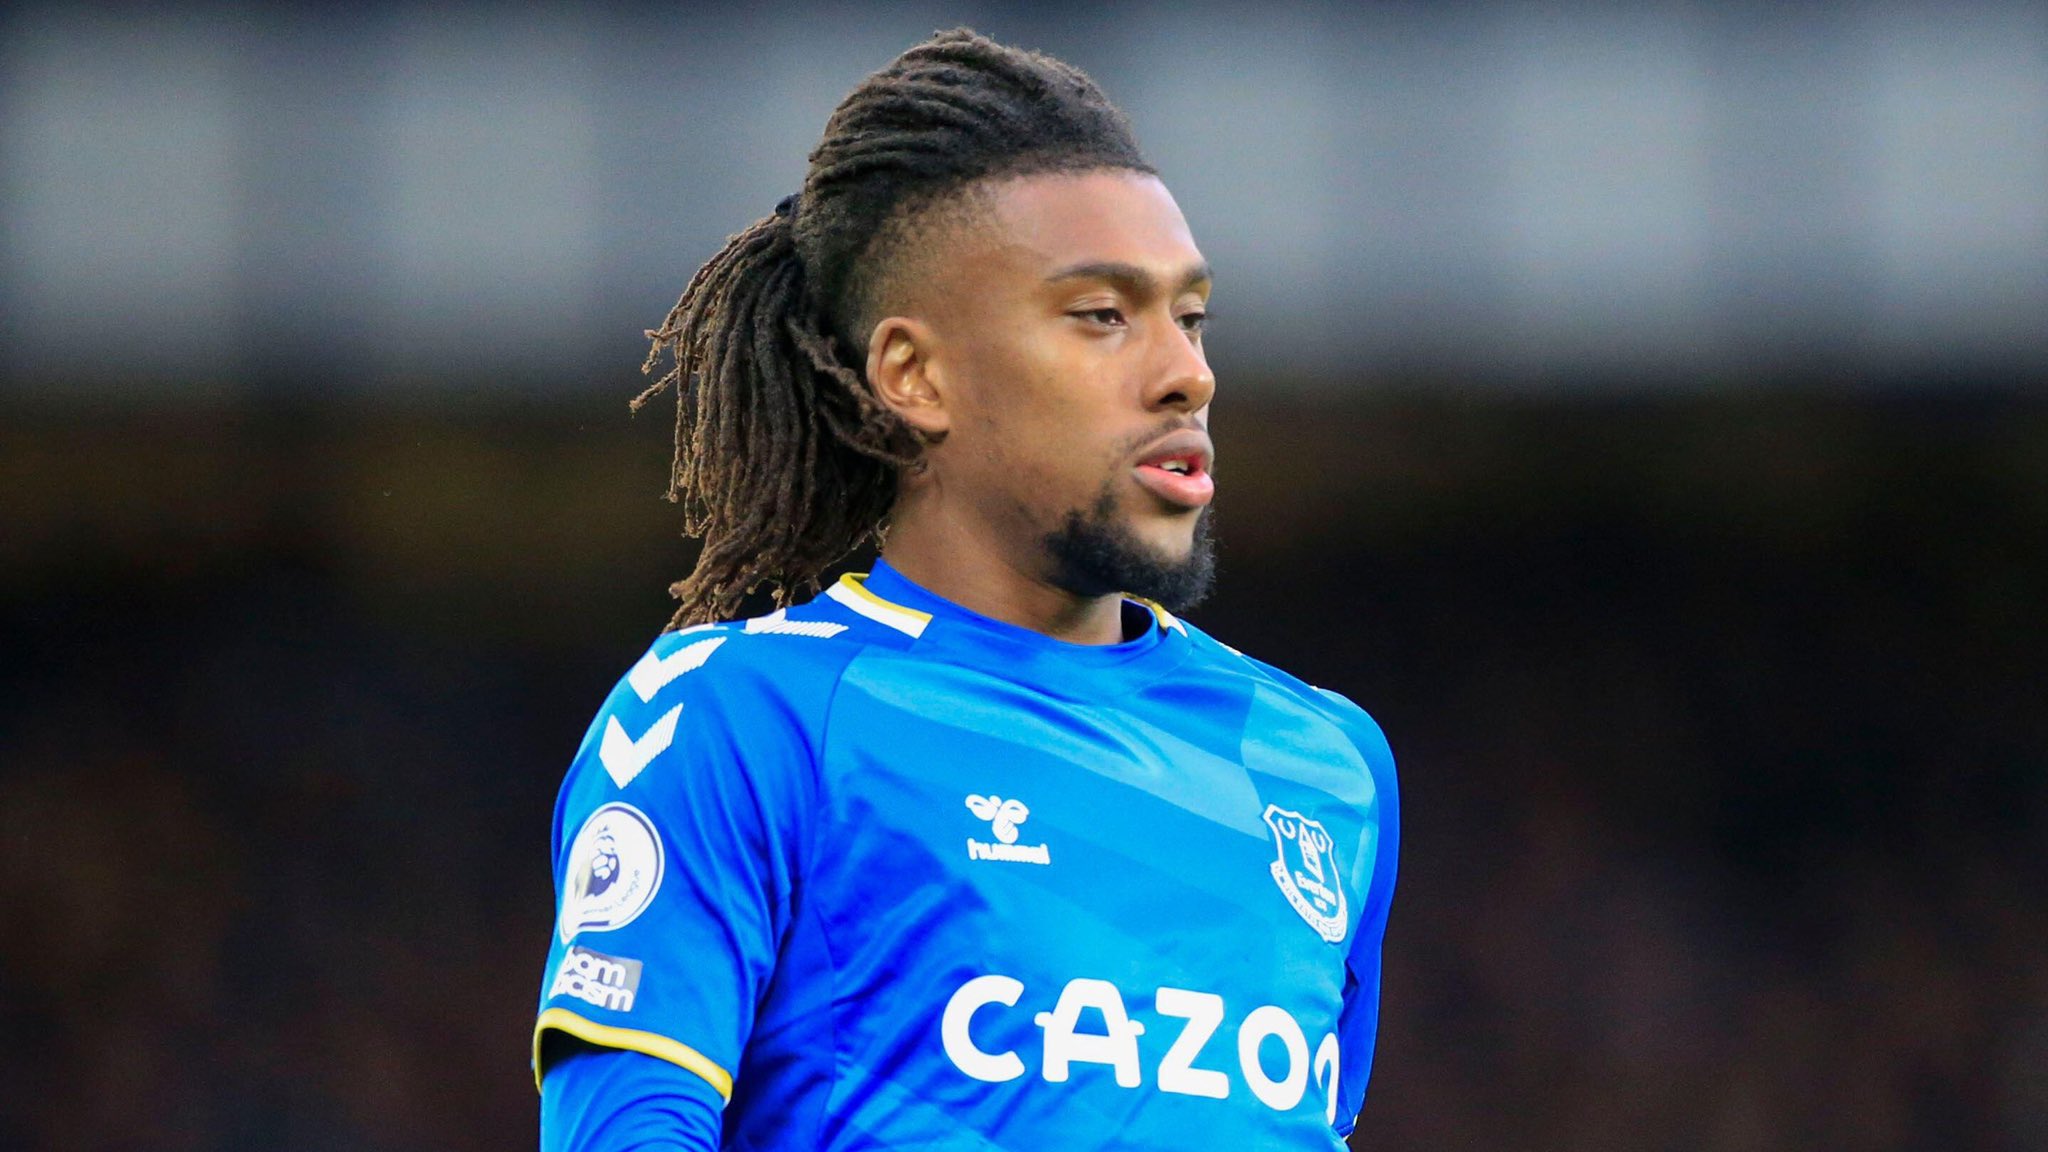 Everton Boss Lampard Wants Iwobi To Sign New Contract Quickly